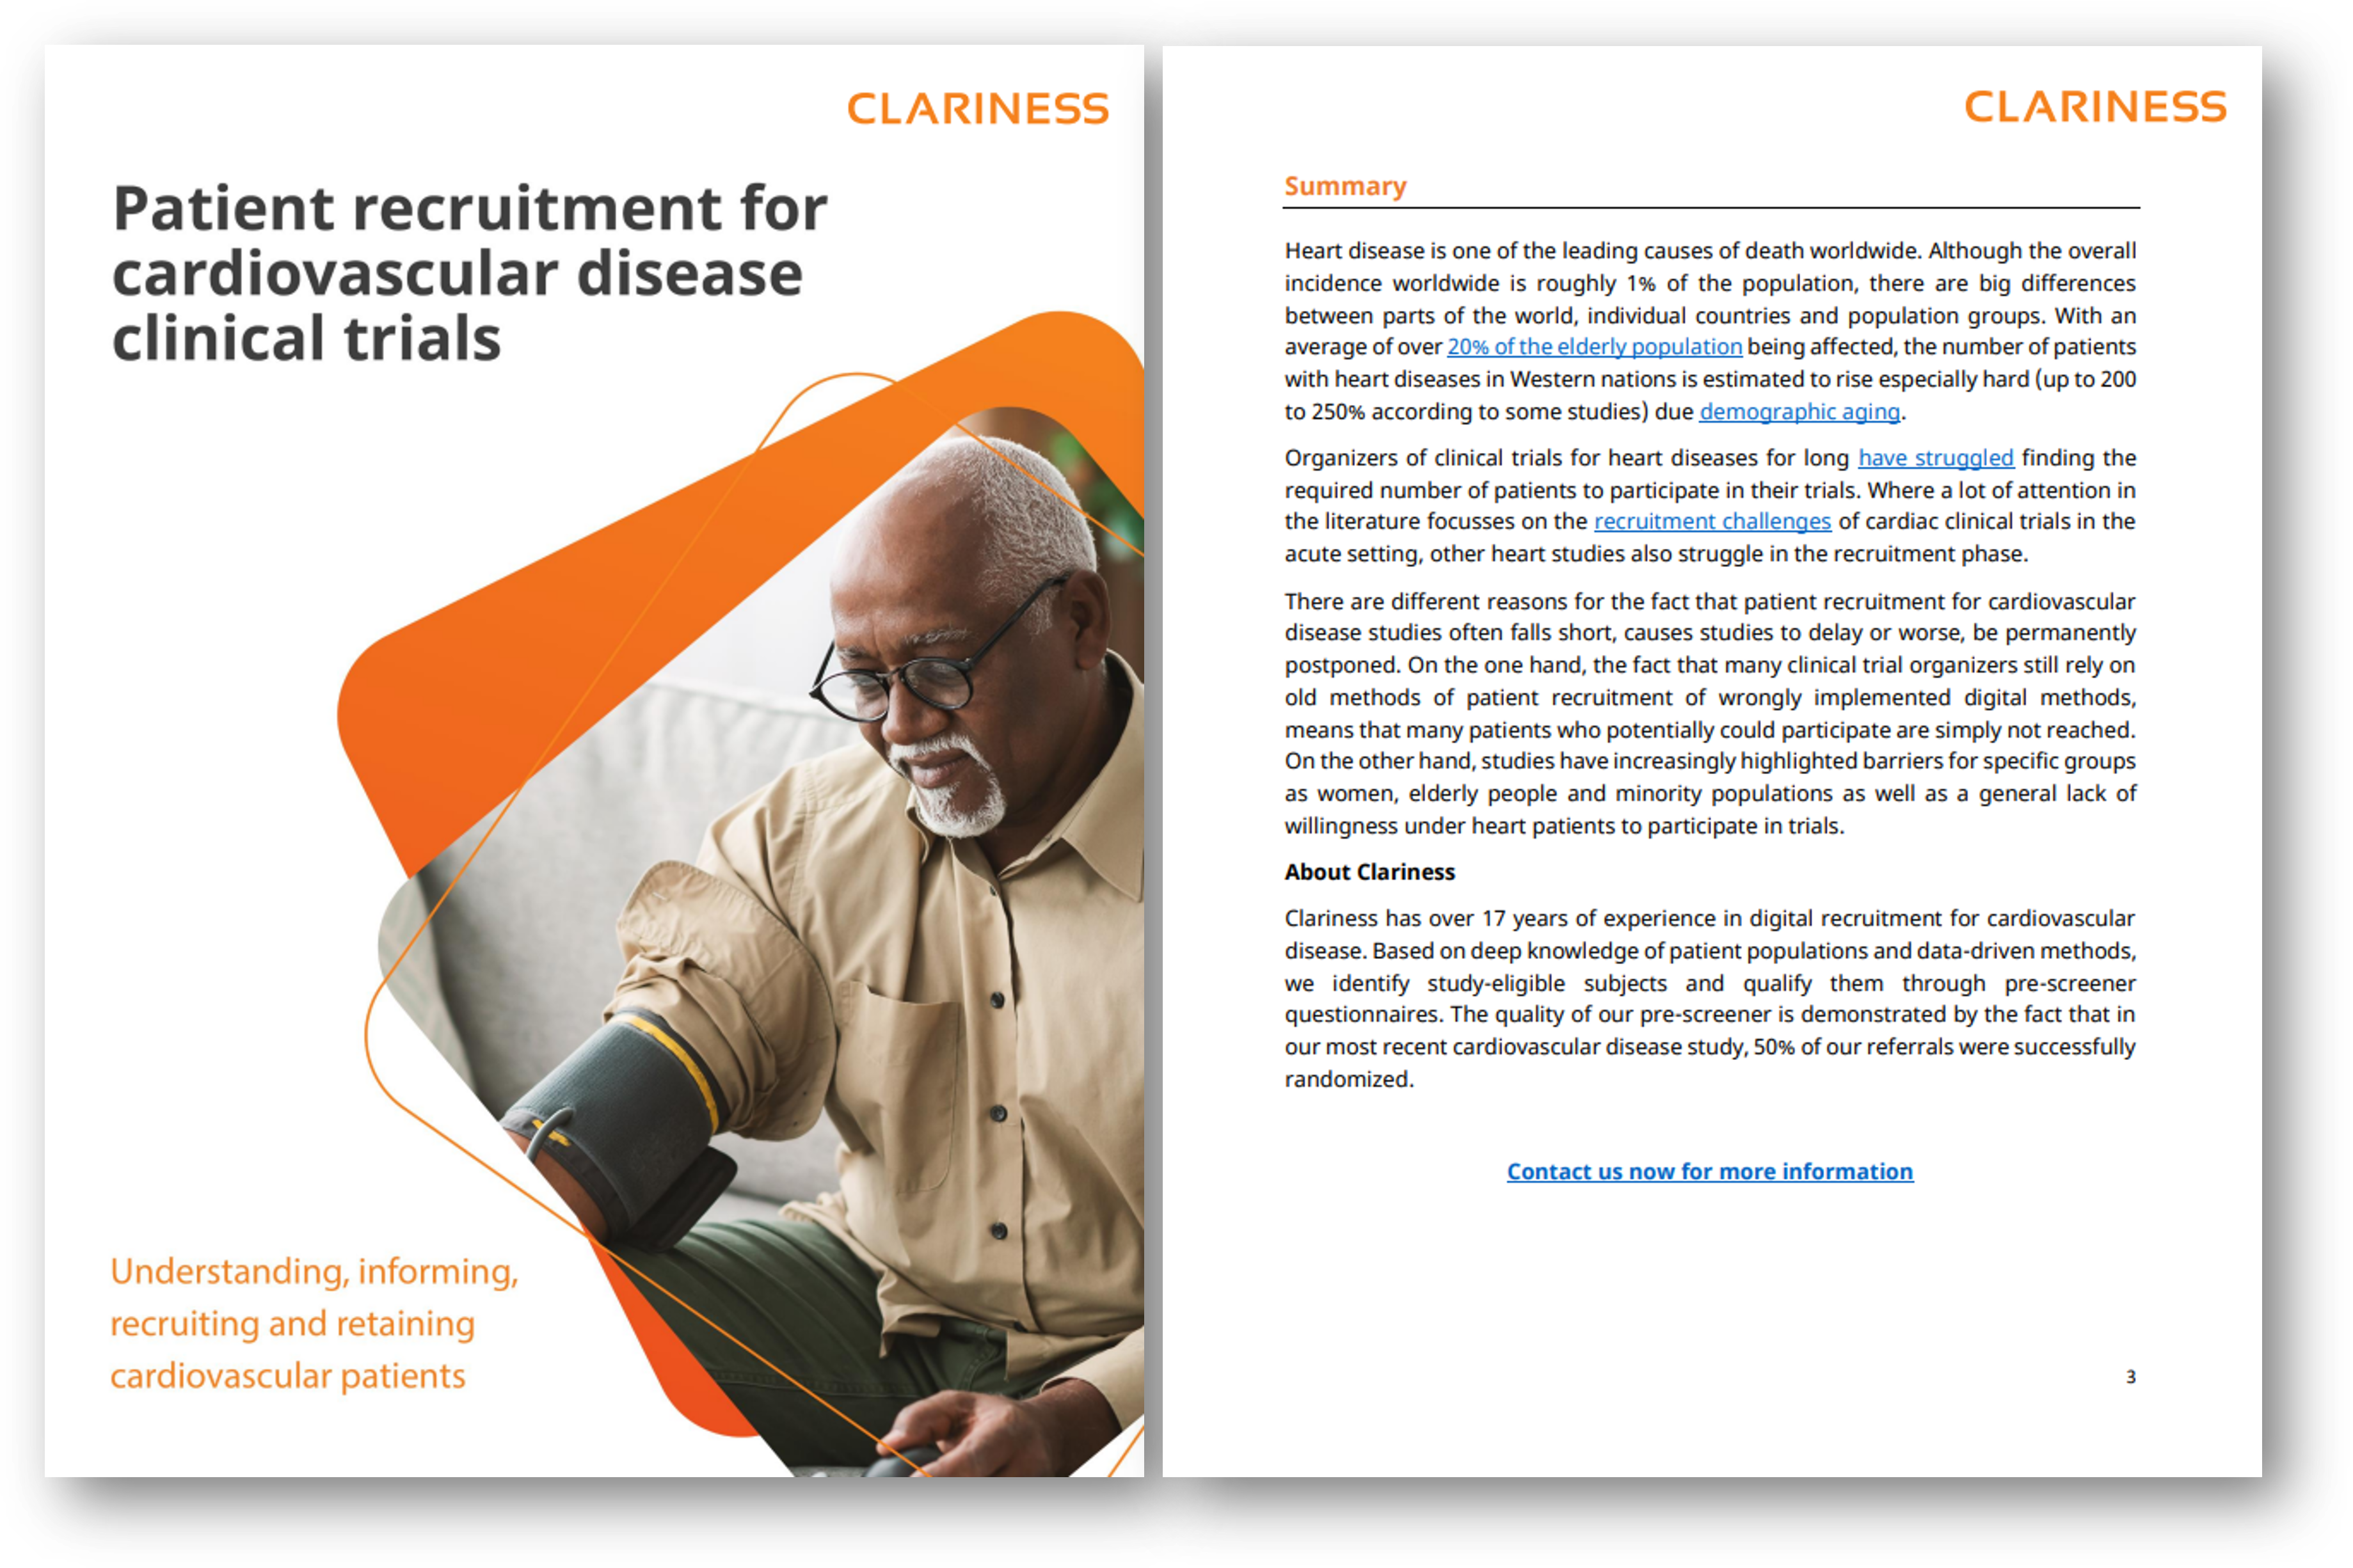 Whitepaper on cardiovascular disease patient recruitment for clinical trials